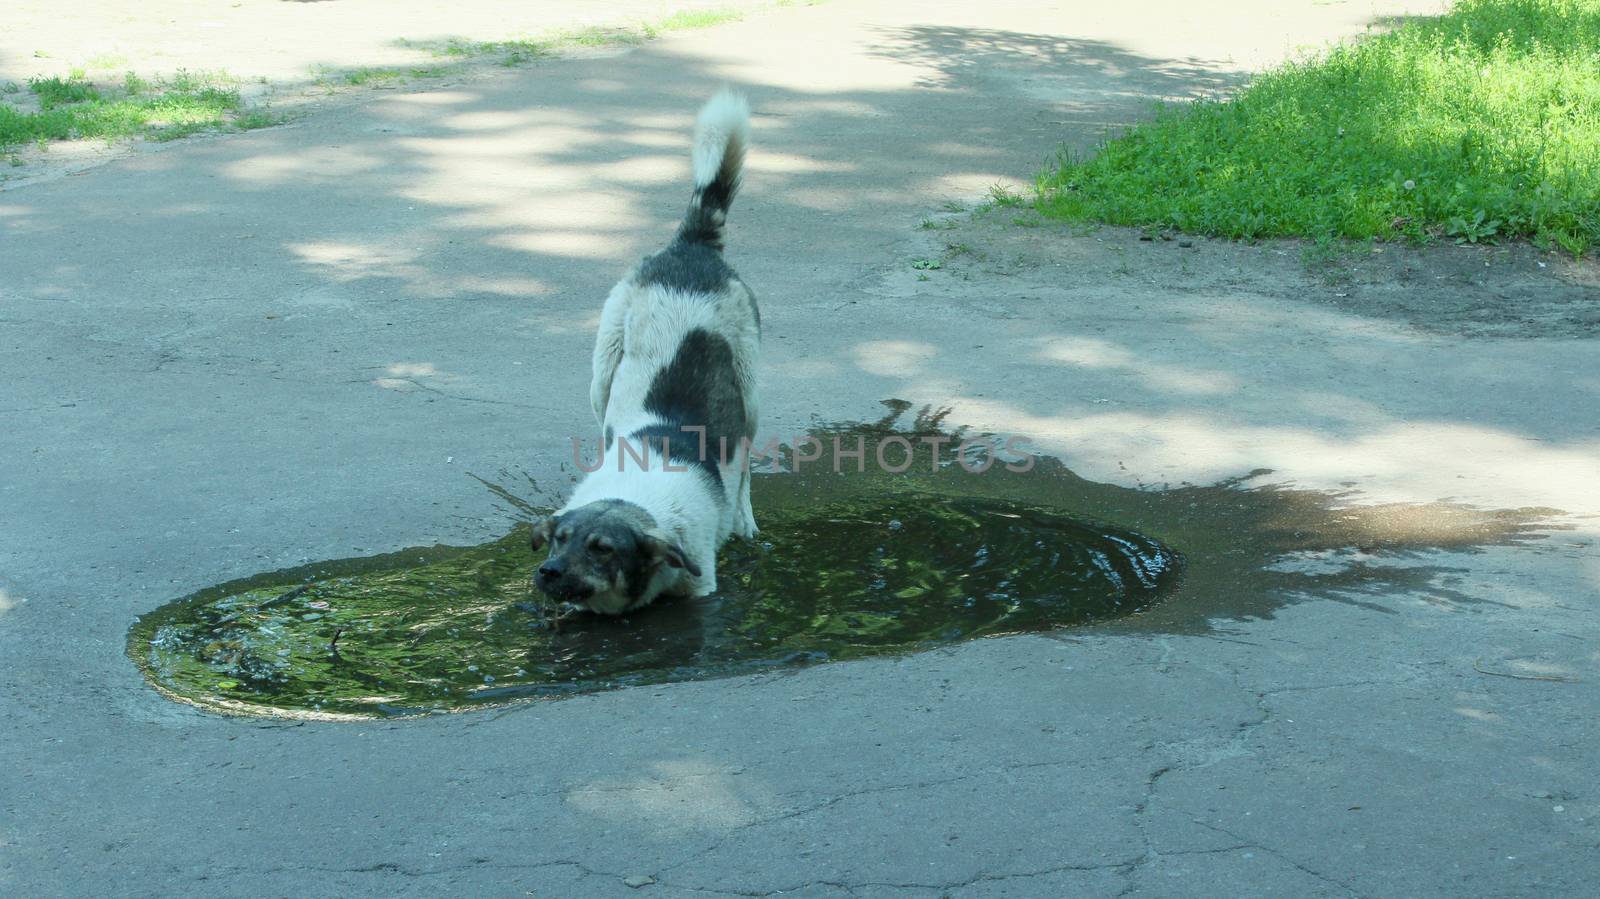 Big dog drinking water from poll slaking its thirst